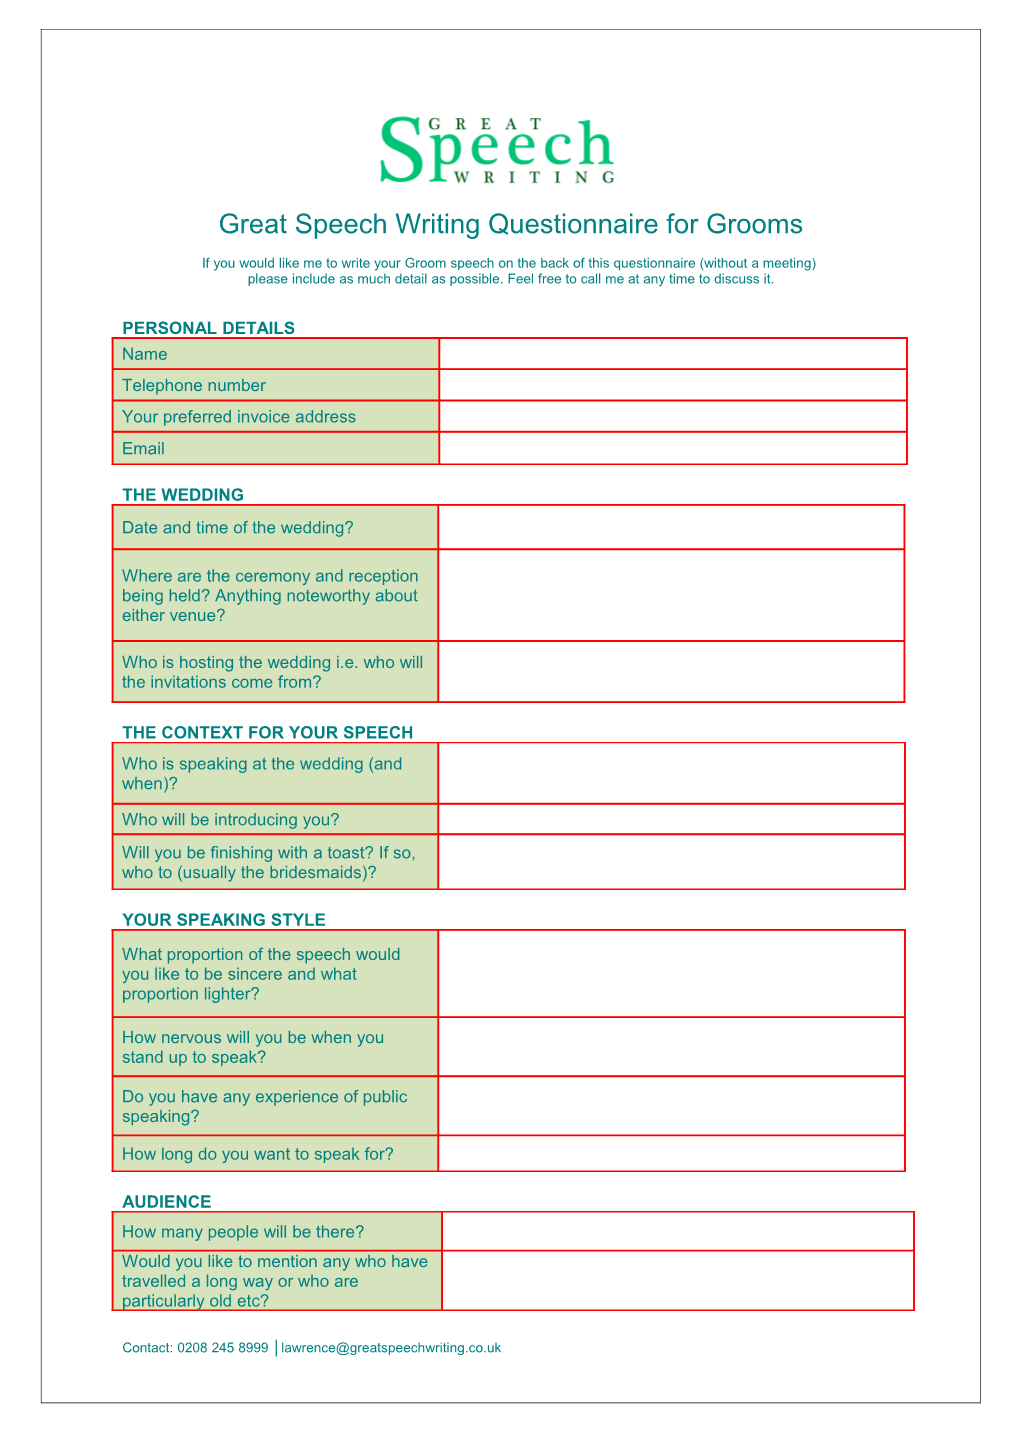 Great Speech Writing Questionnaire for Grooms